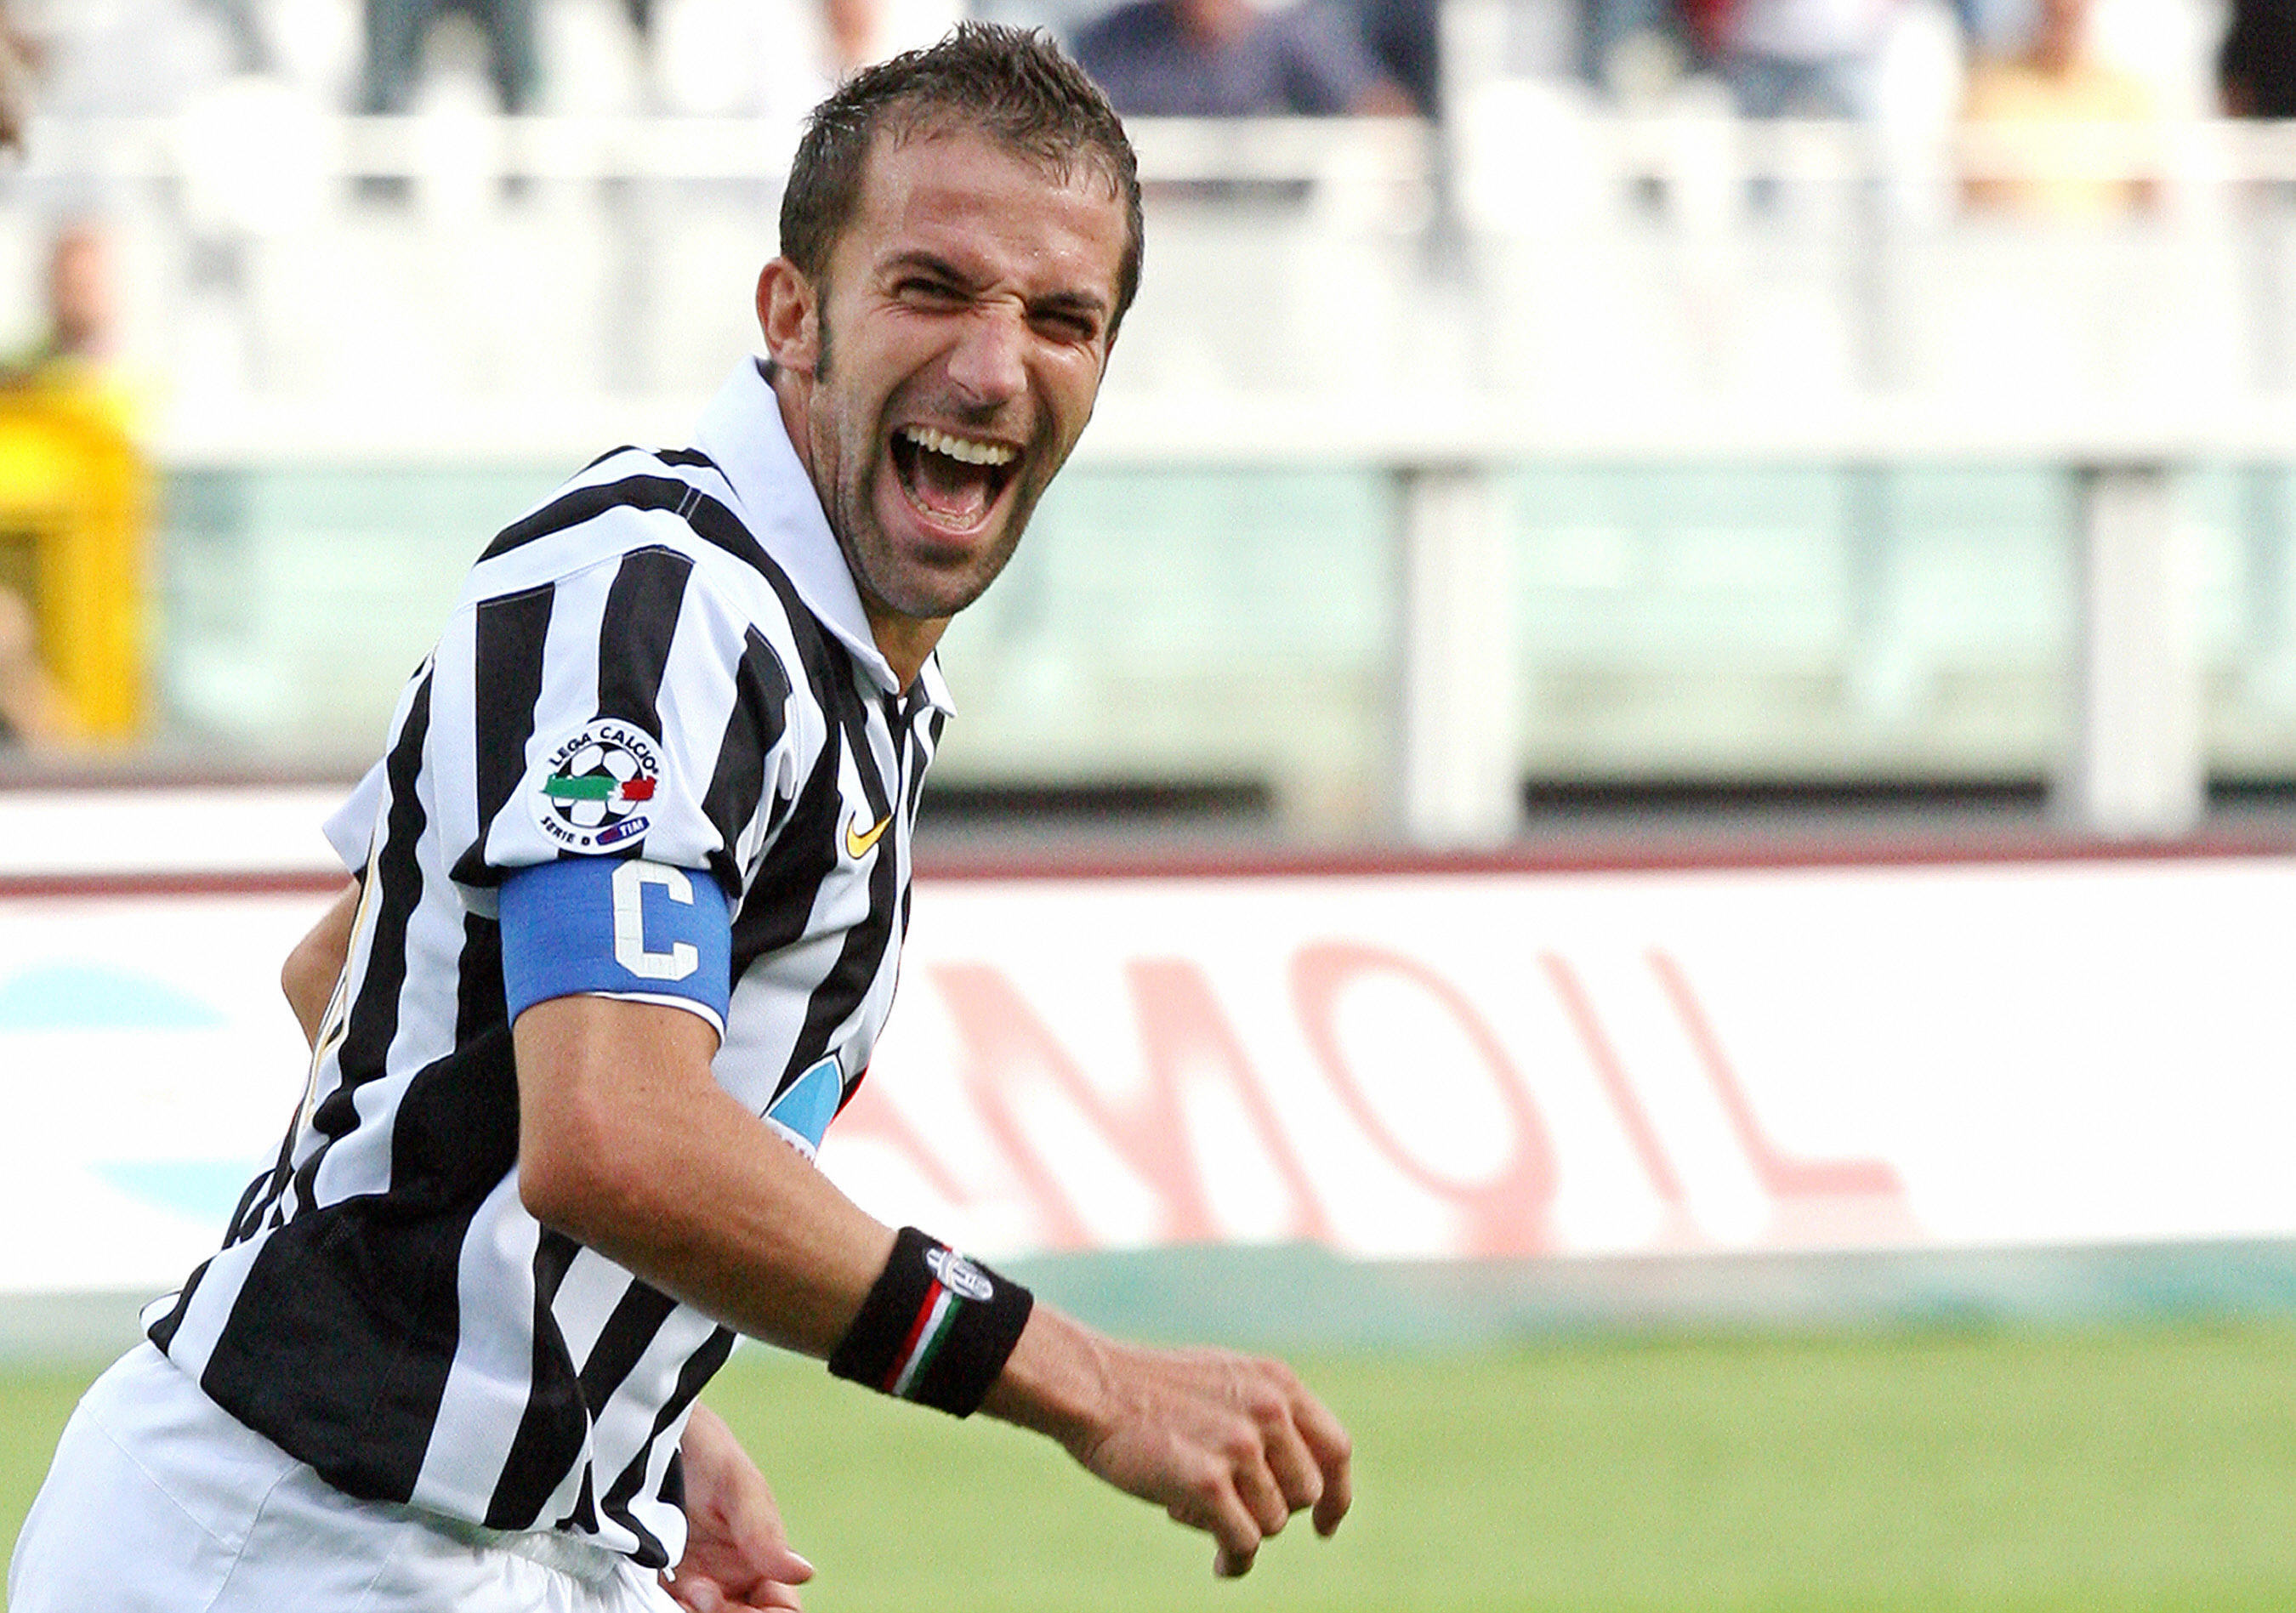 Alessandro Del Piero celebrates a goal for Juventus against Vicenza in Serie B in September 2006.